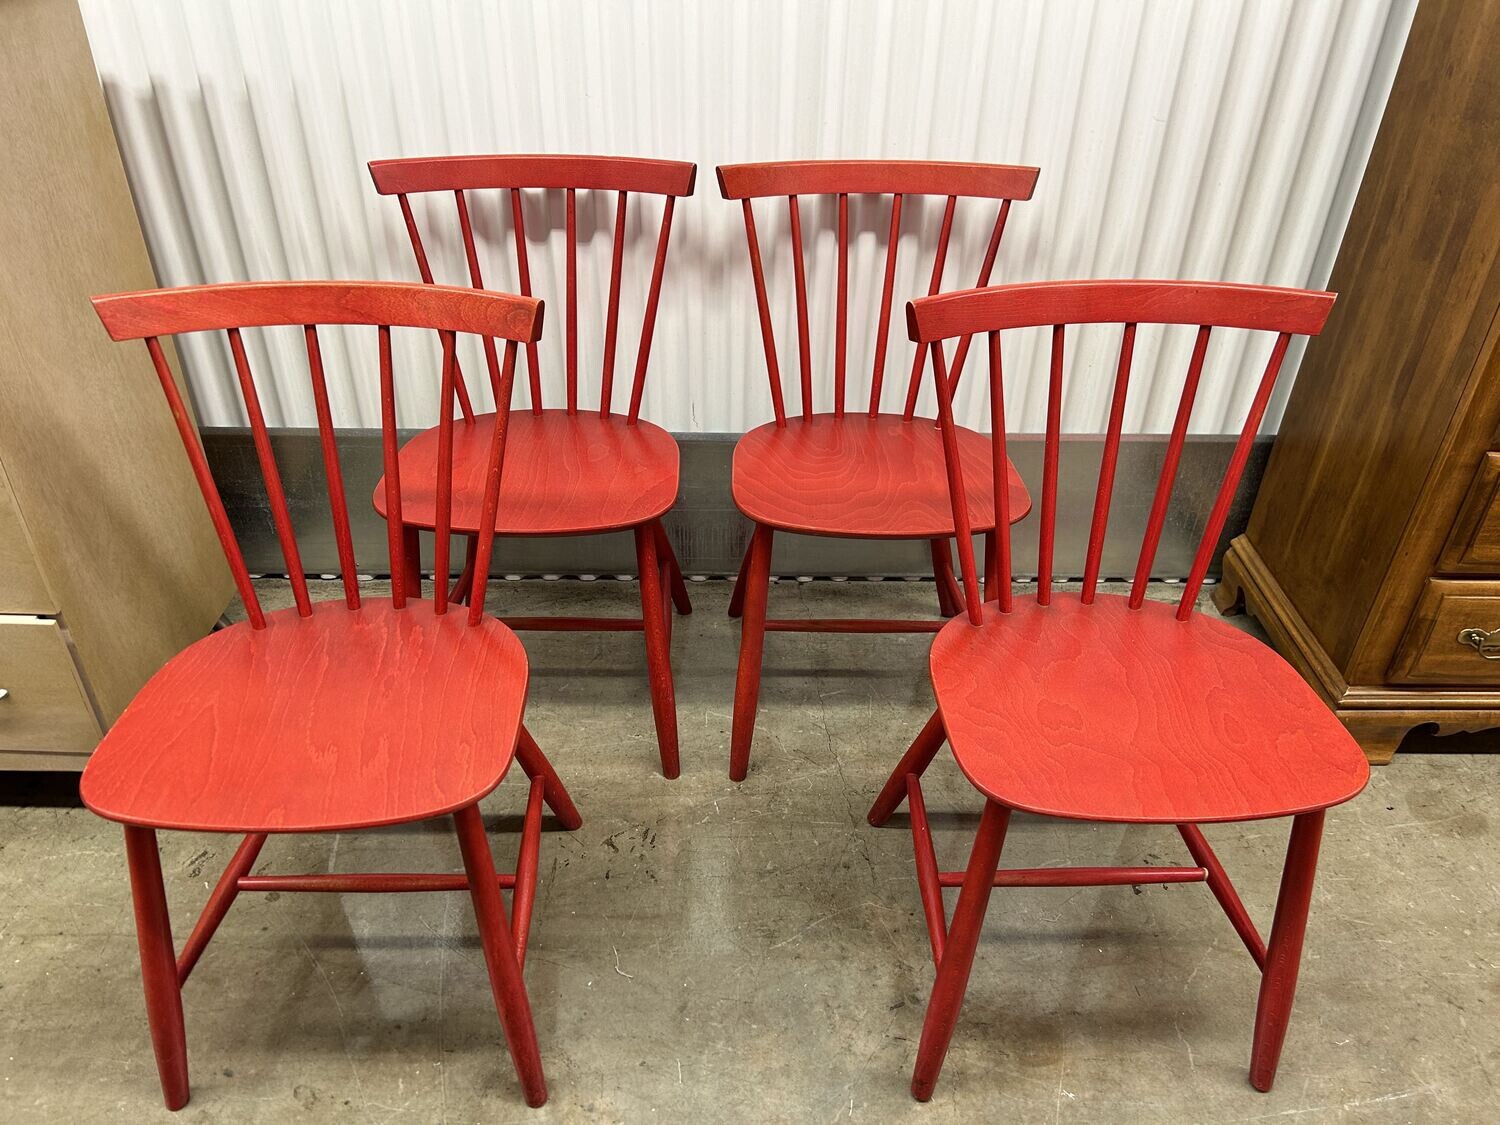 Set of 4 Danish Dining Chairs, red #2114